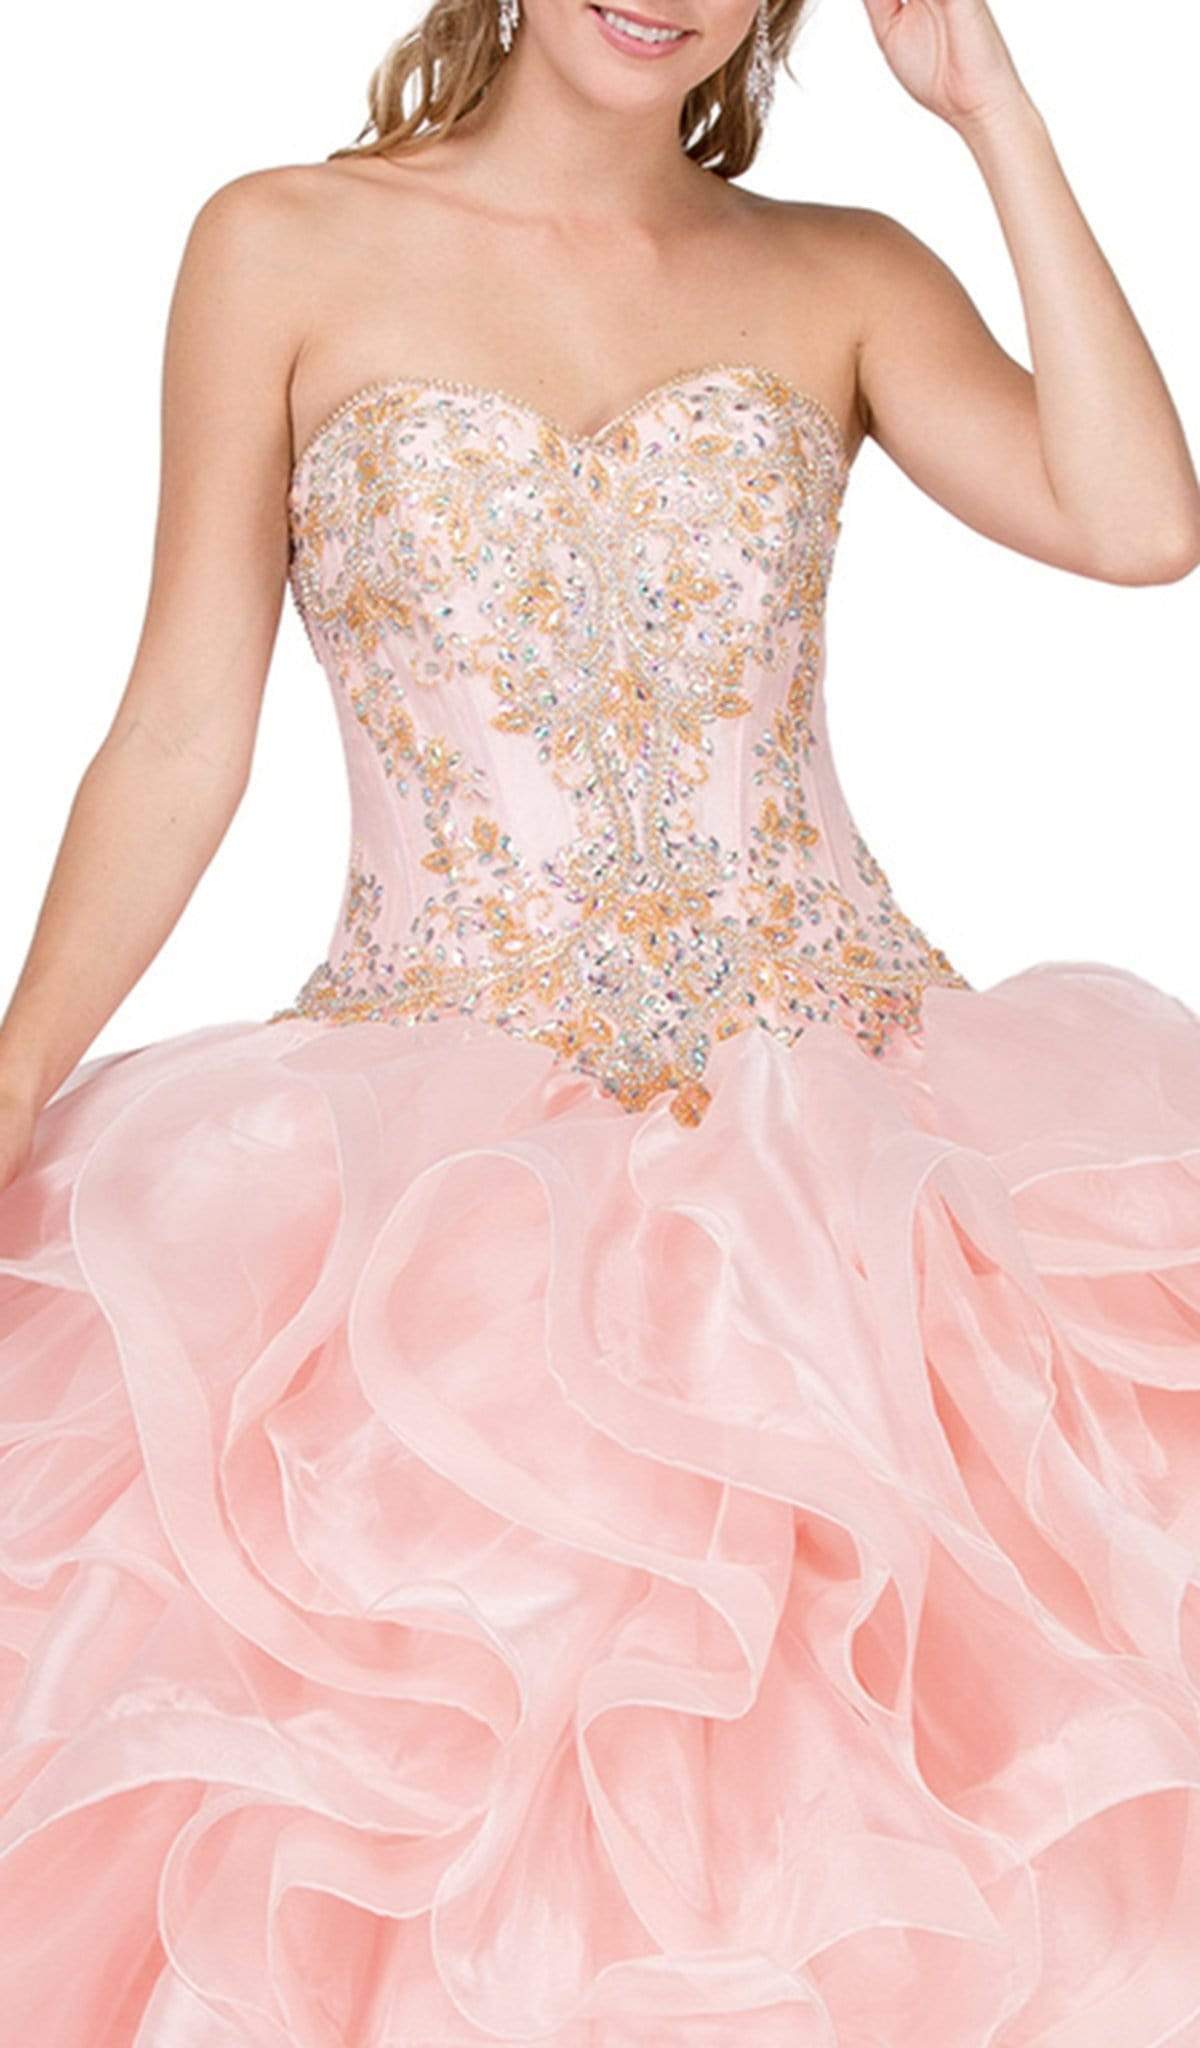 Dancing Queen - 1250 Strapless Embroidered Ruffled Quinceanera Gown Special Occasion Dress